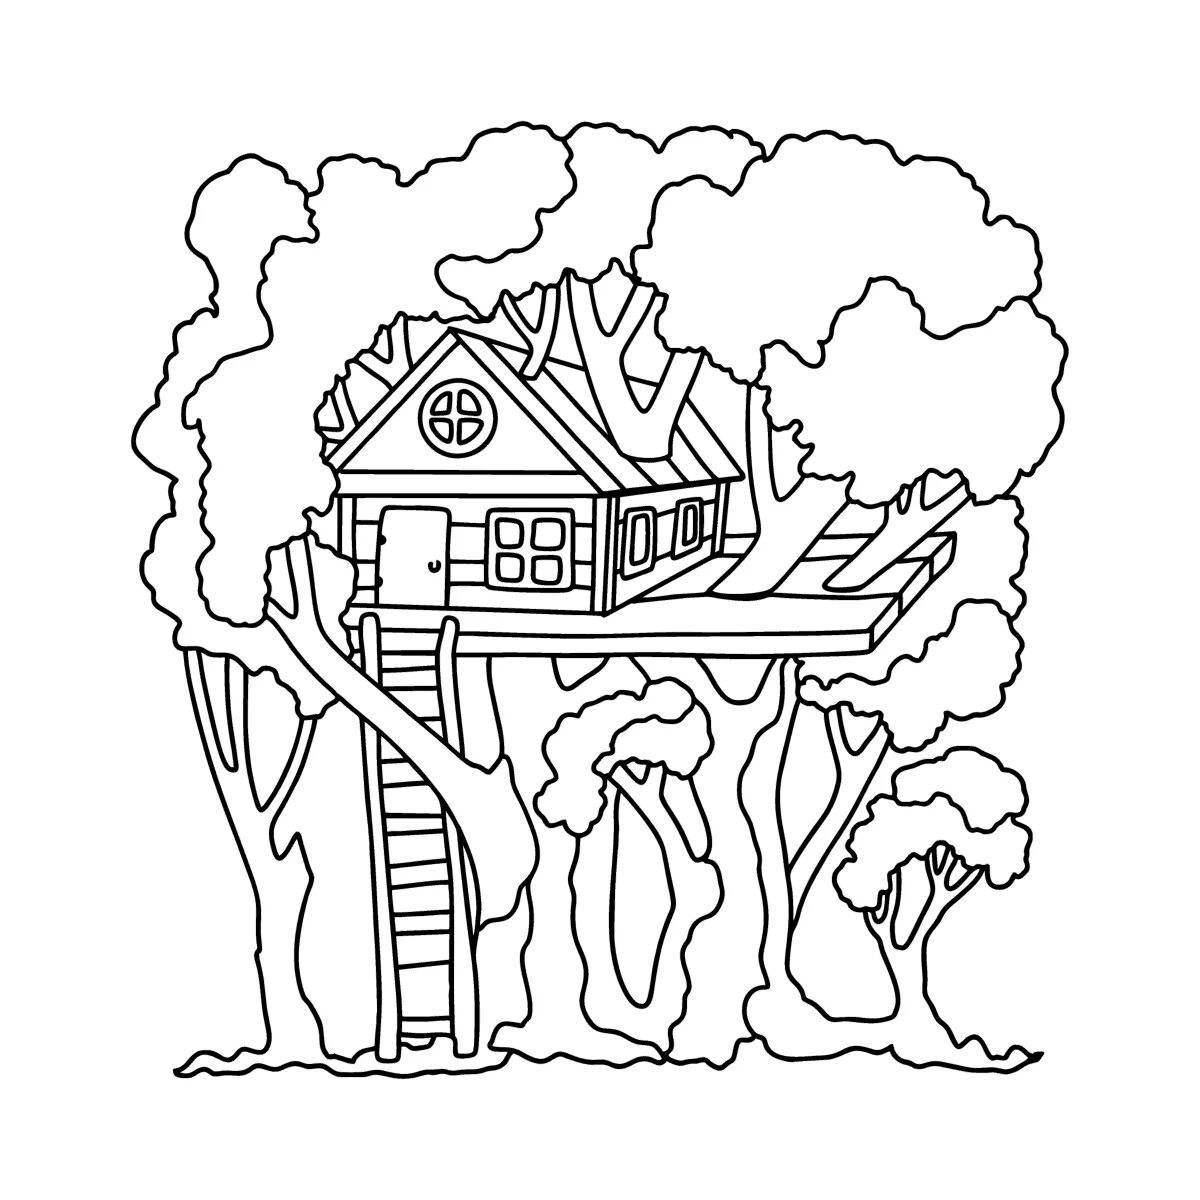 Adorable wooden house coloring book for toddlers